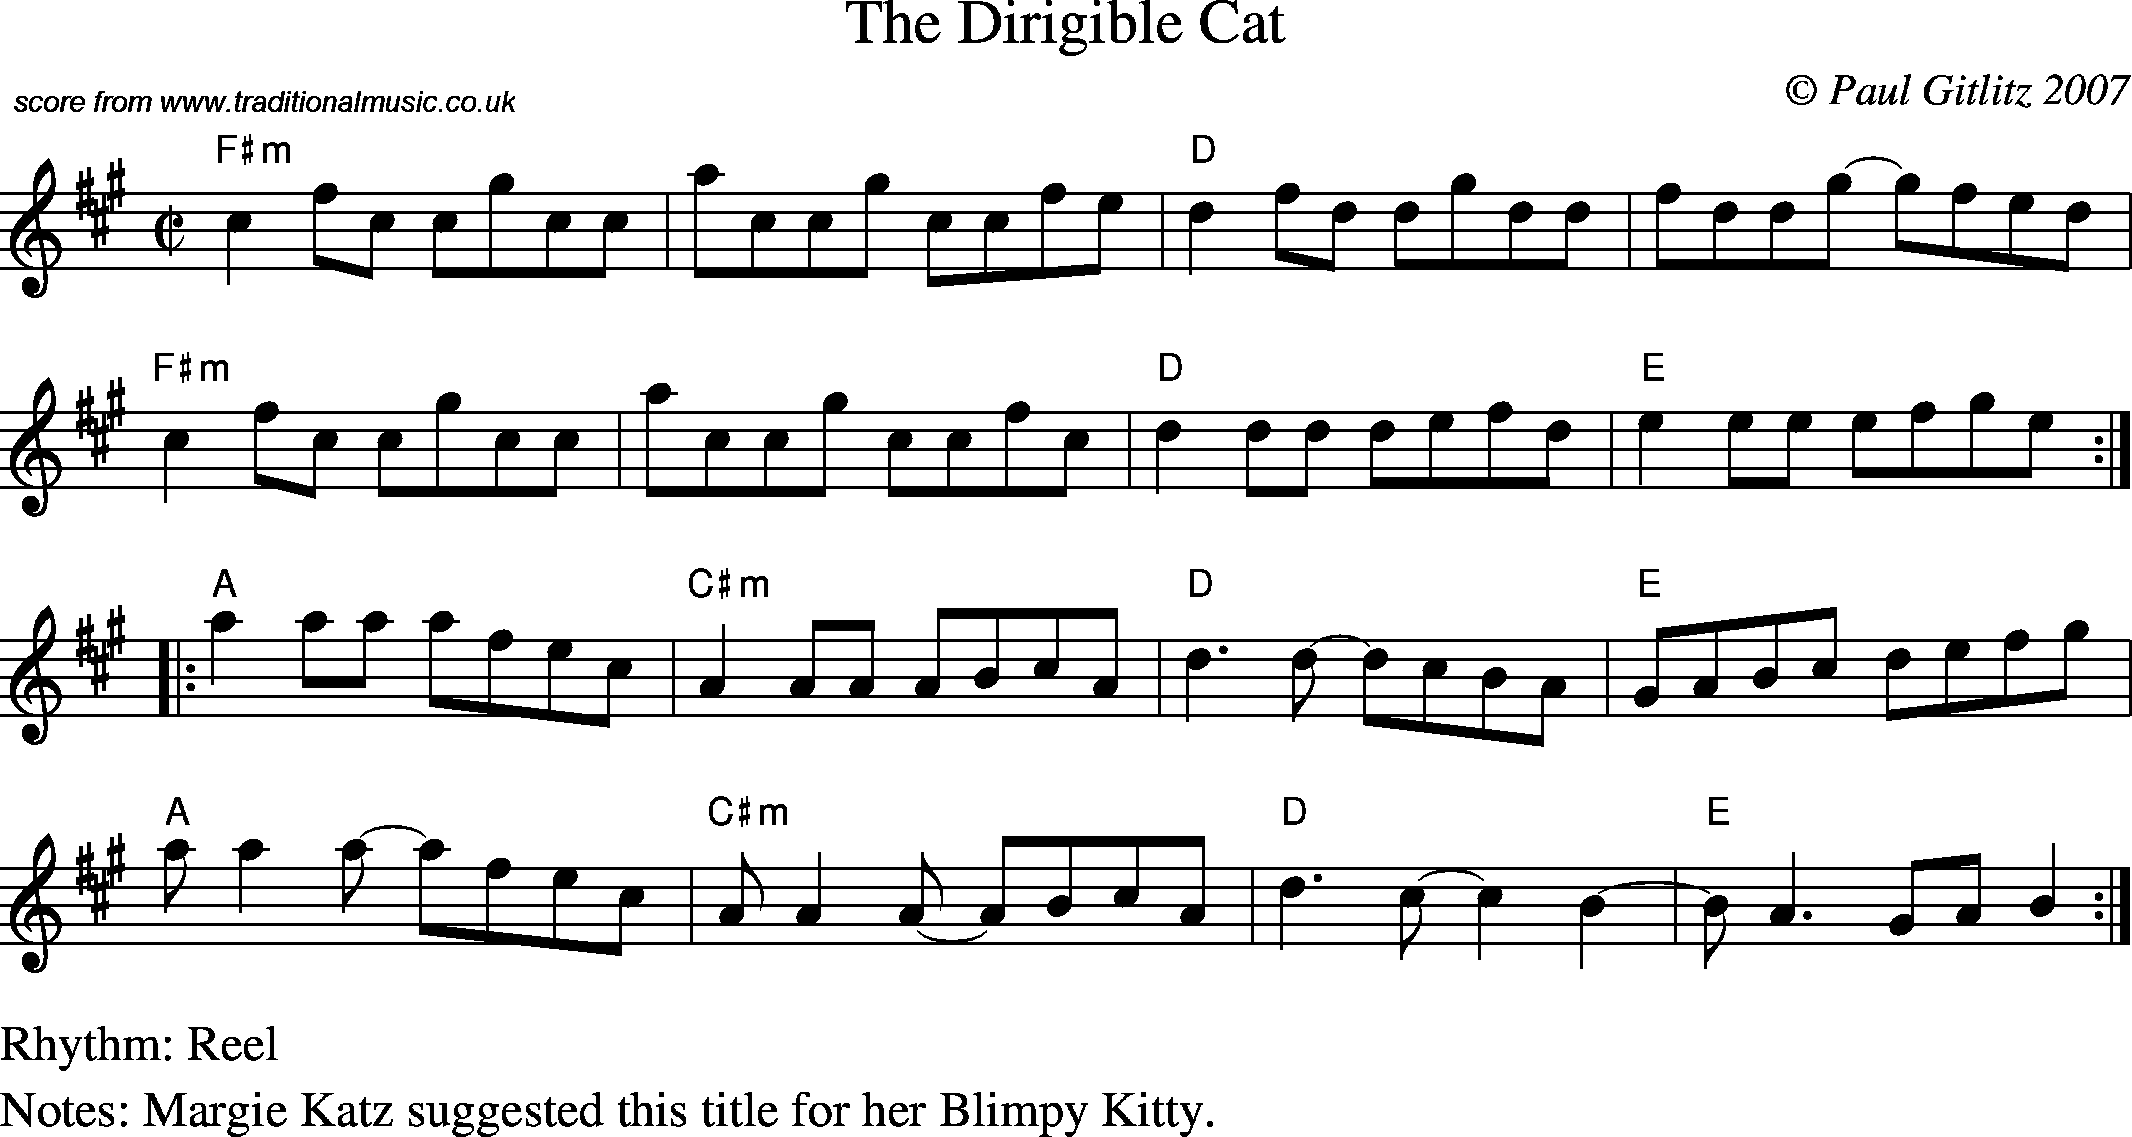 Sheet Music Score for Reel - Dirigible Cat, The